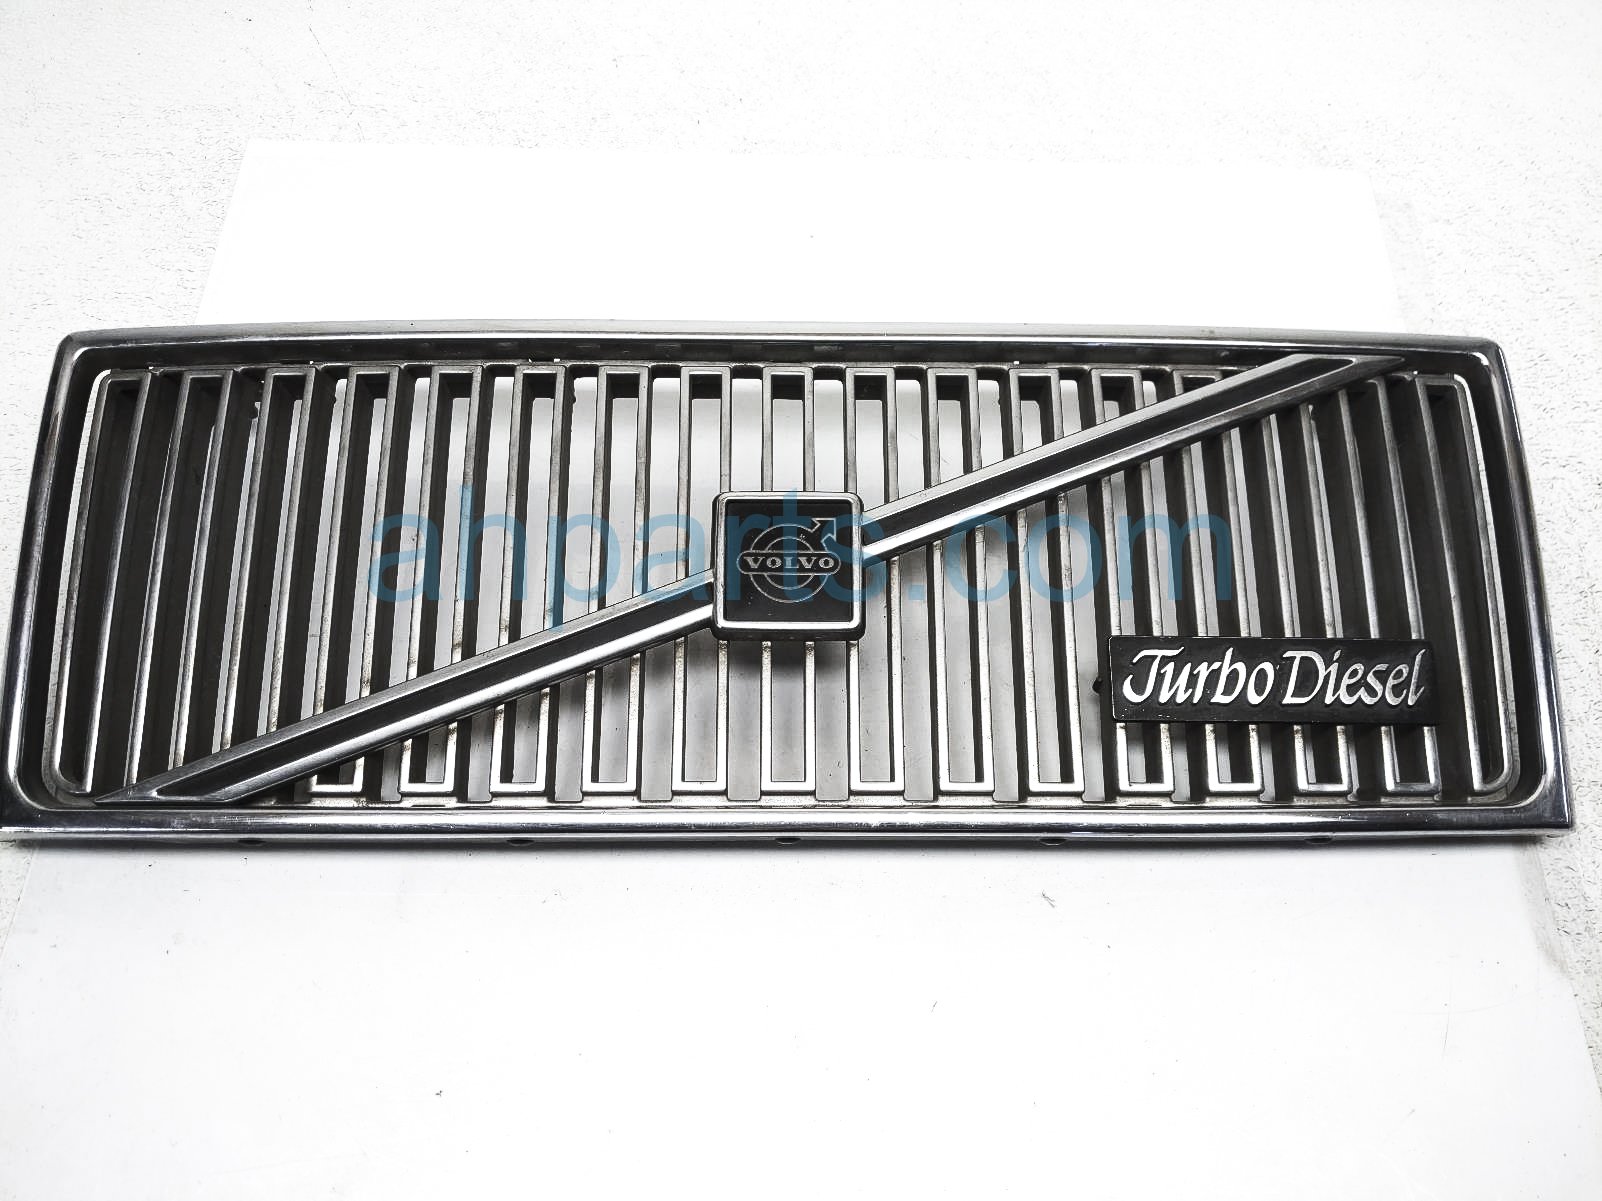 $49 Volvo FRONT GRILLE - CHROME